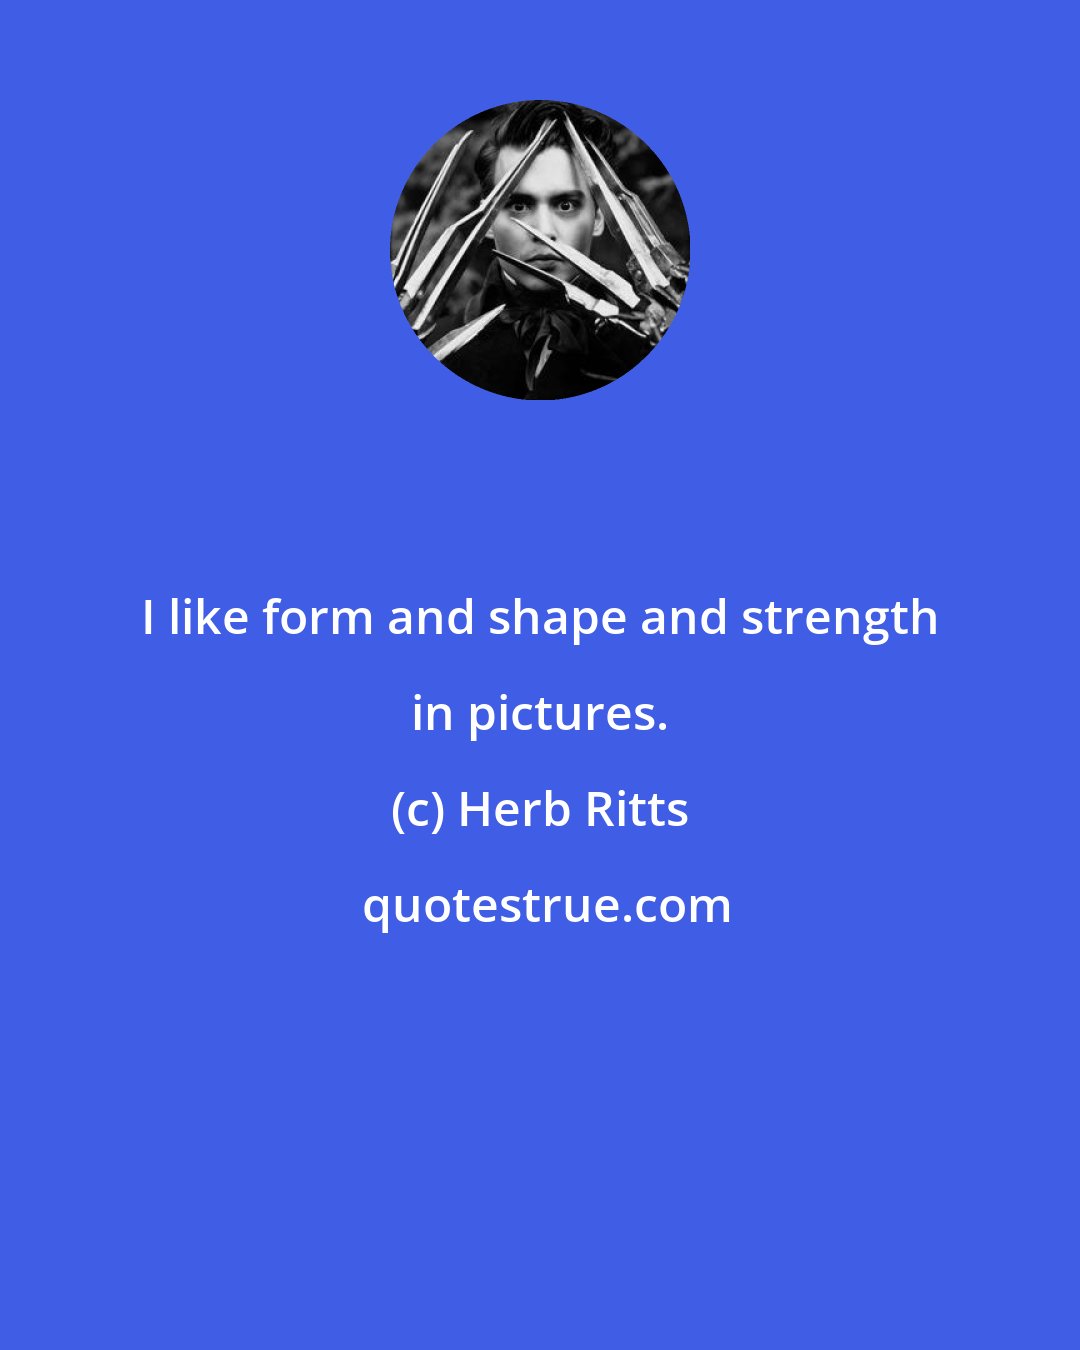 Herb Ritts: I like form and shape and strength in pictures.